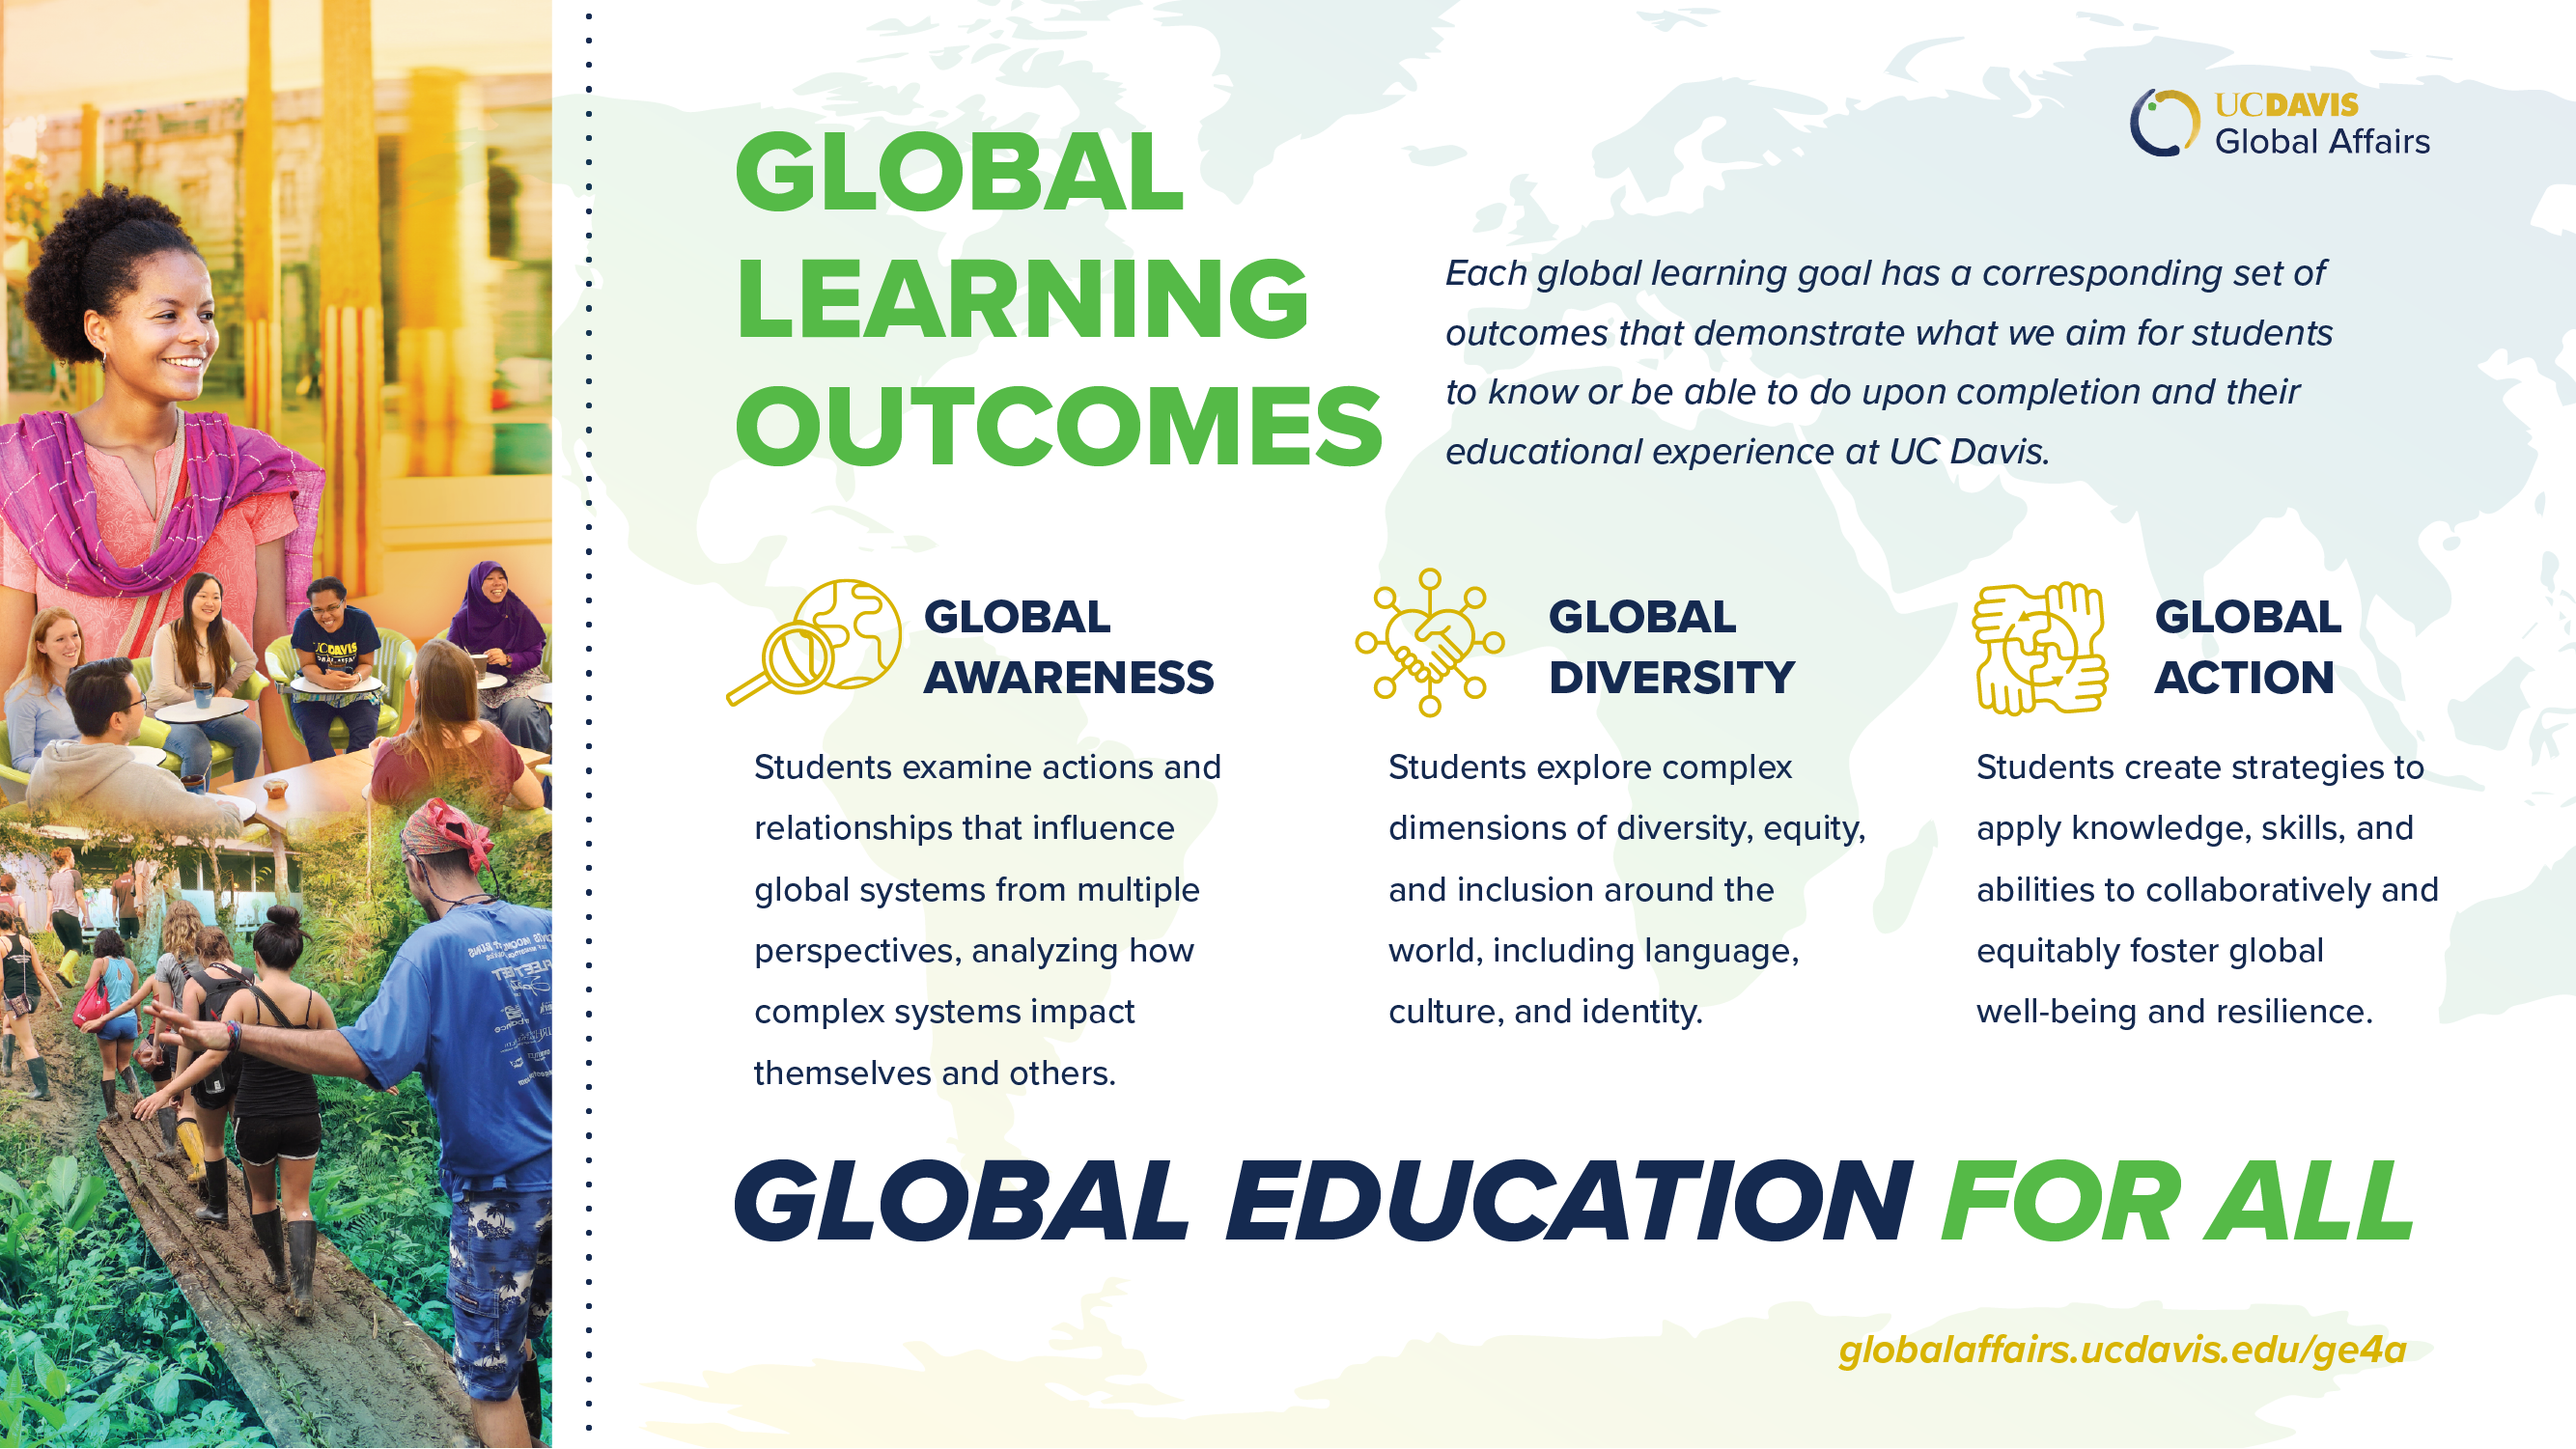 Graphic with text "Global Learning Outcomes"